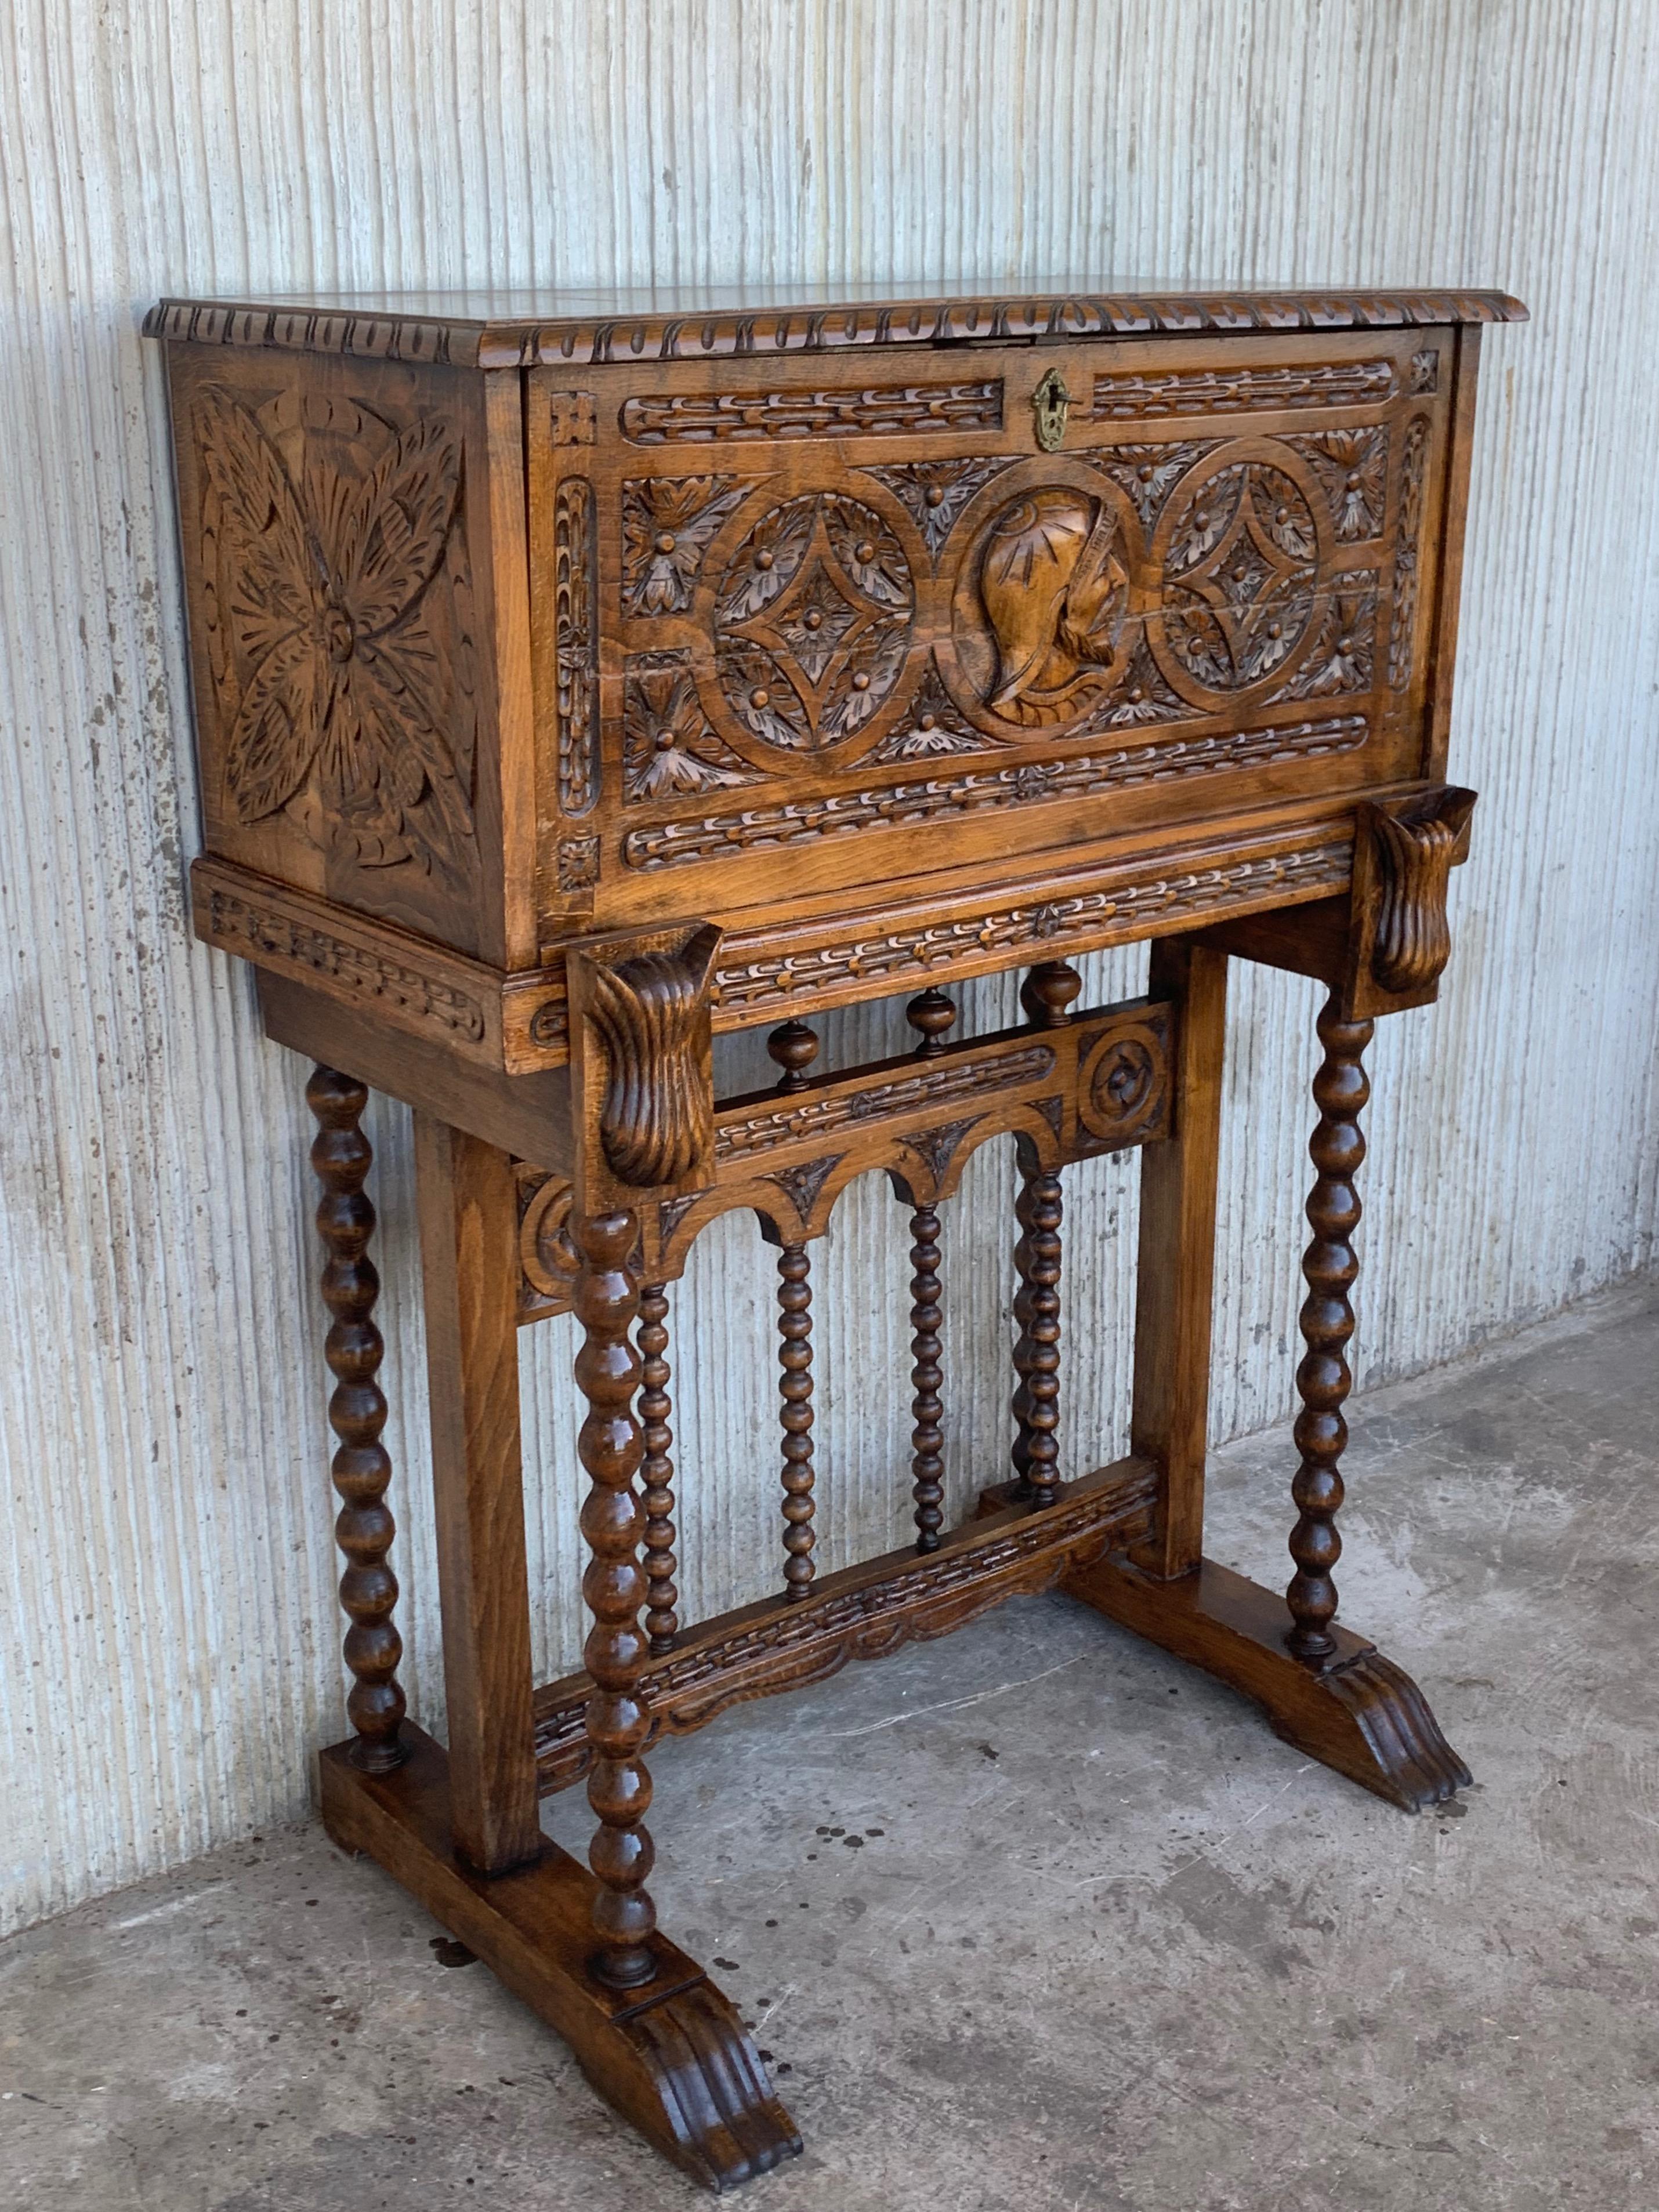 Walnut 20th Century Spanish Baroque Style Cabinet on Stand, Bargueno or Varqueno